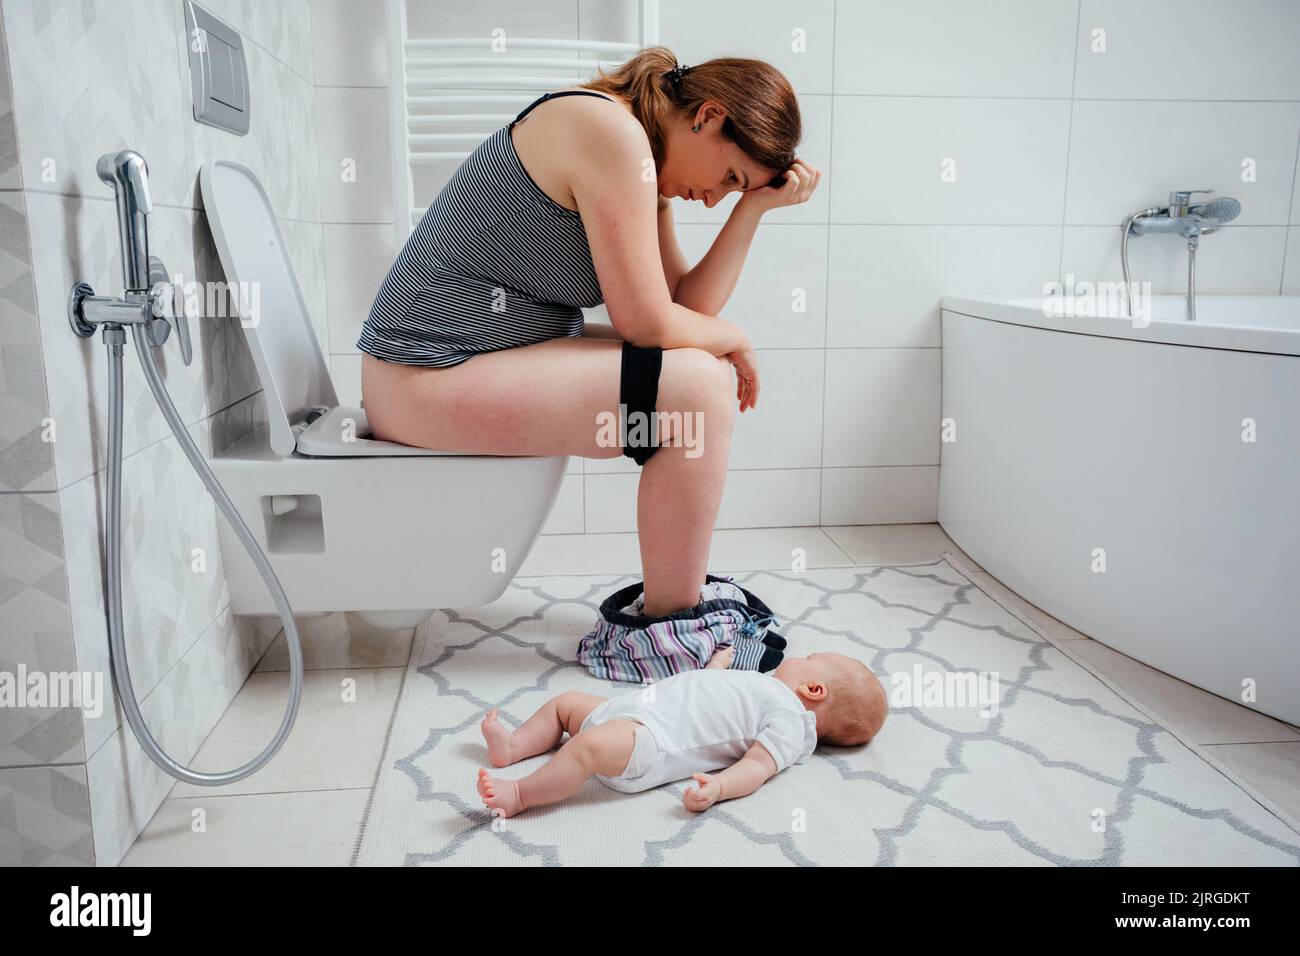 Tired depressed mother with crying newborn baby Stock Photo